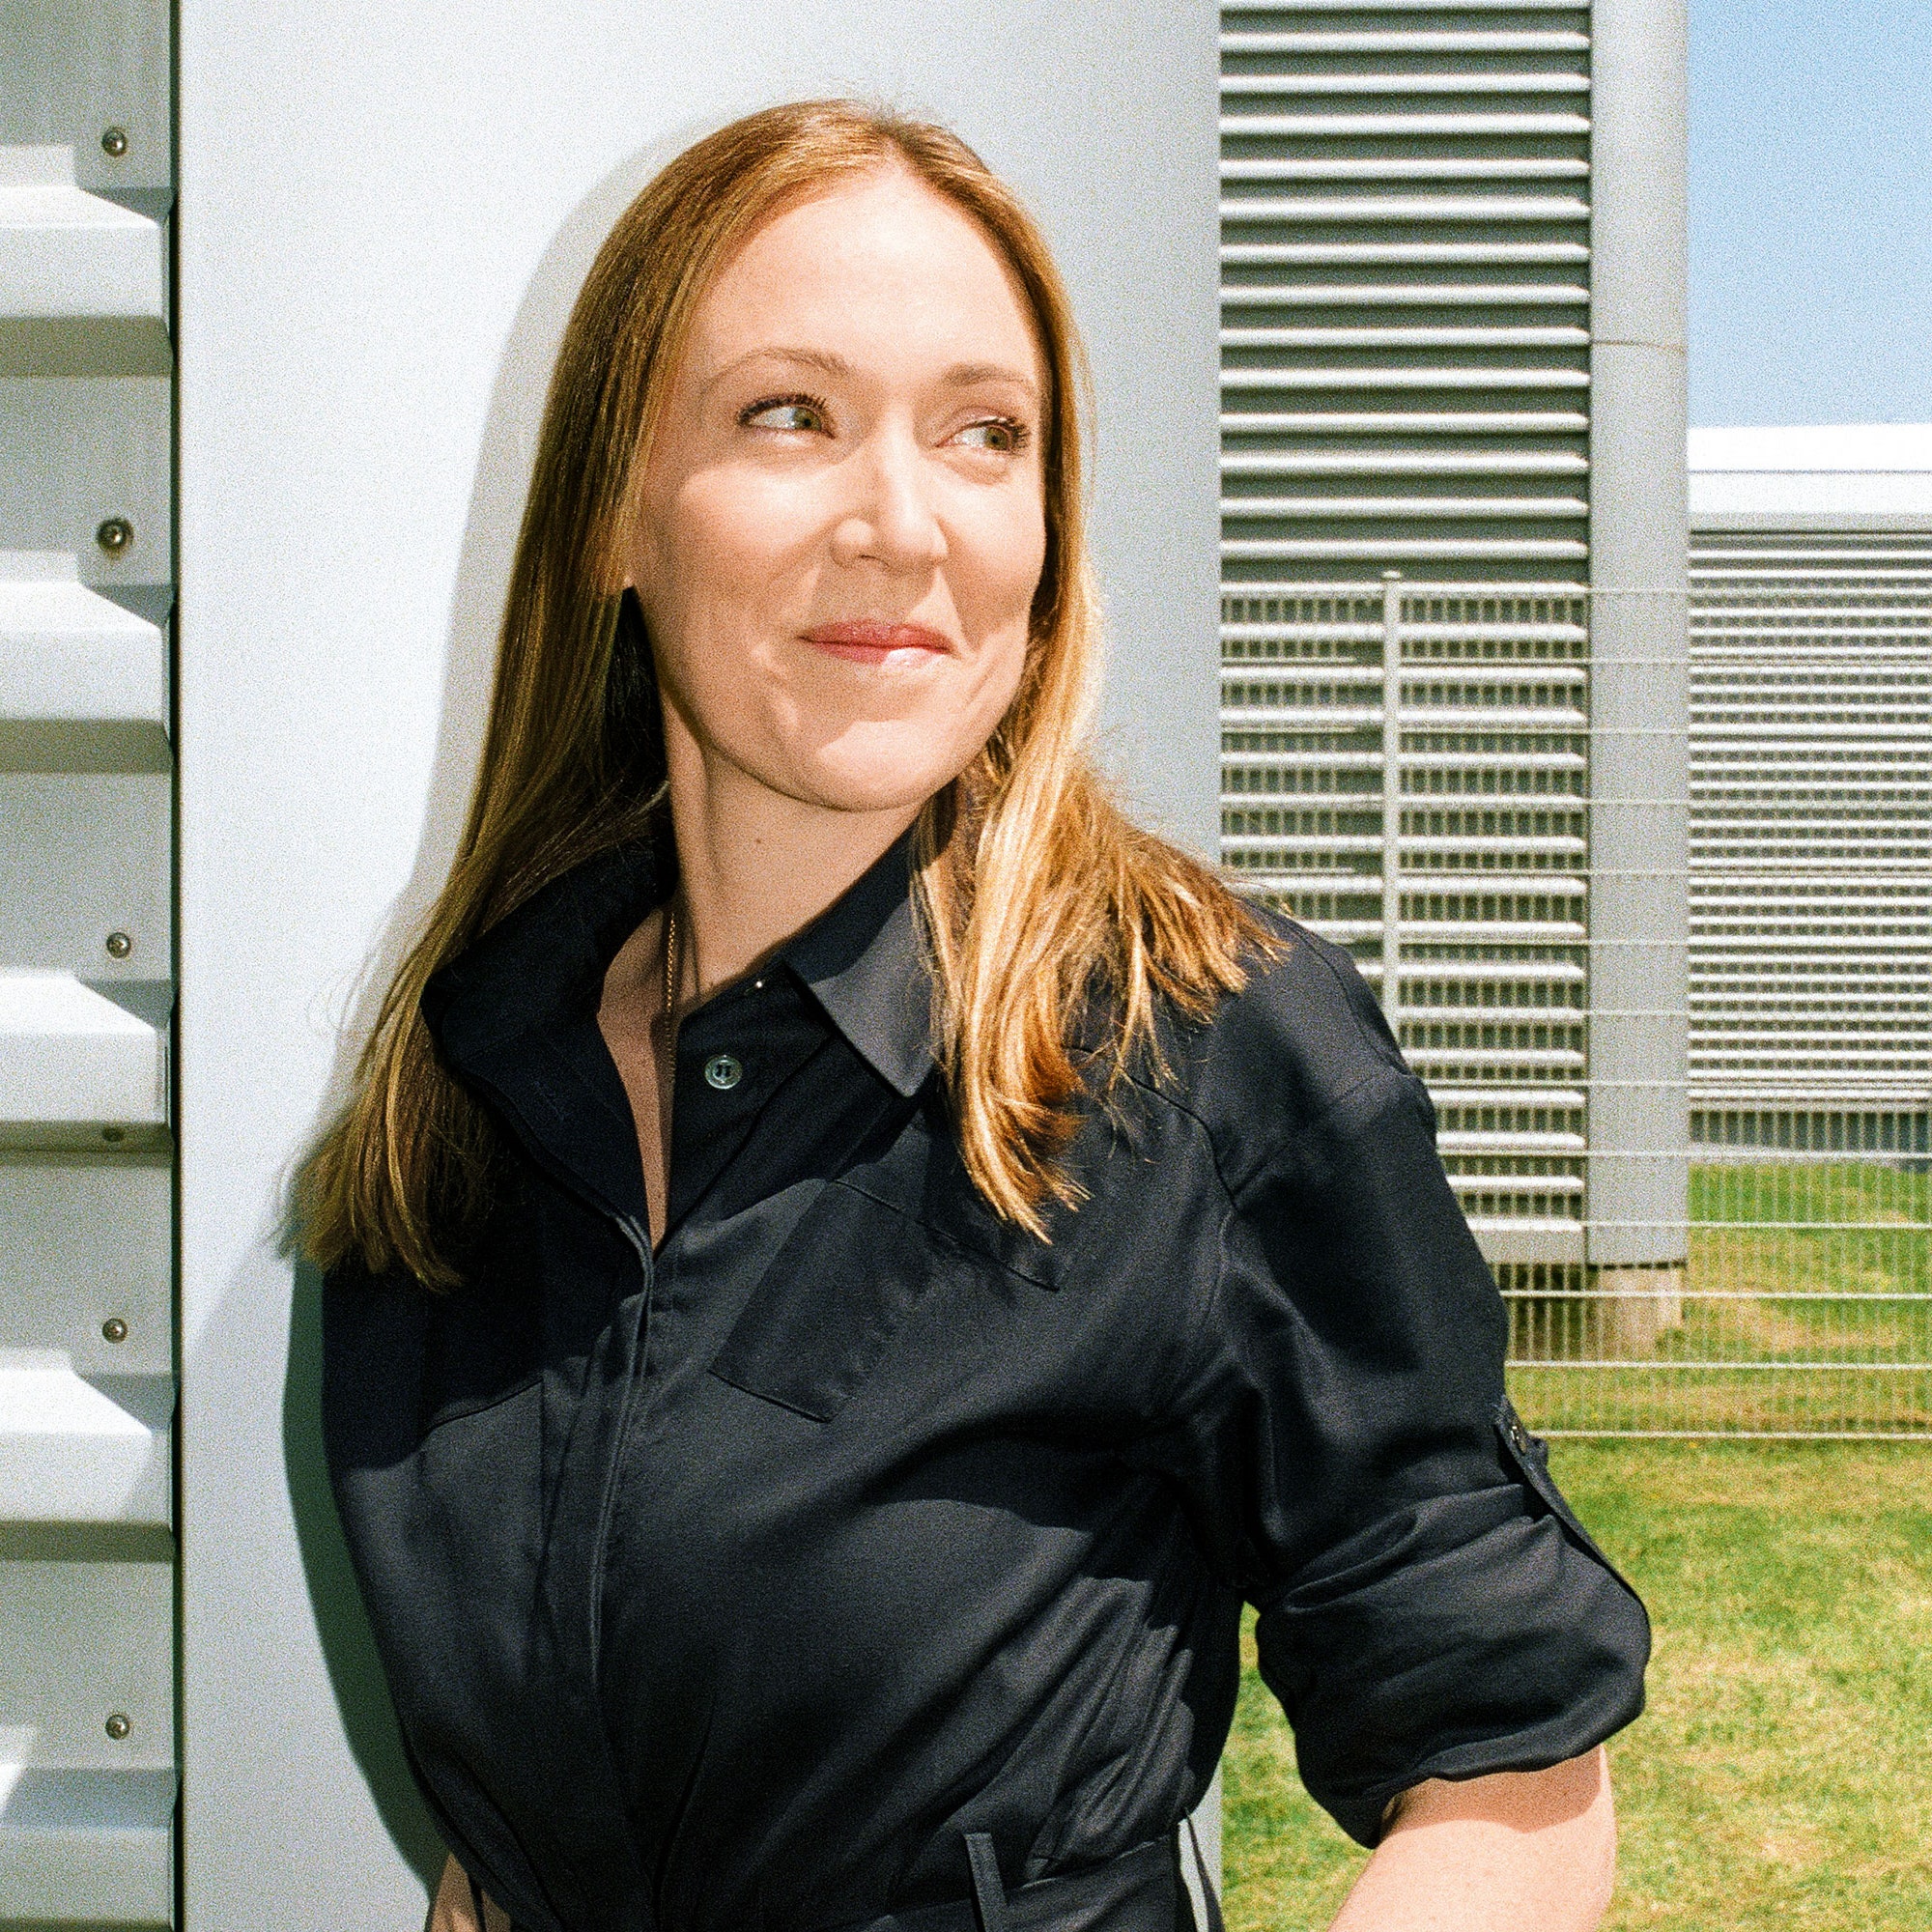 Where to Go in Cologne, Germany, According to Rimowa's Emelie de Vitis